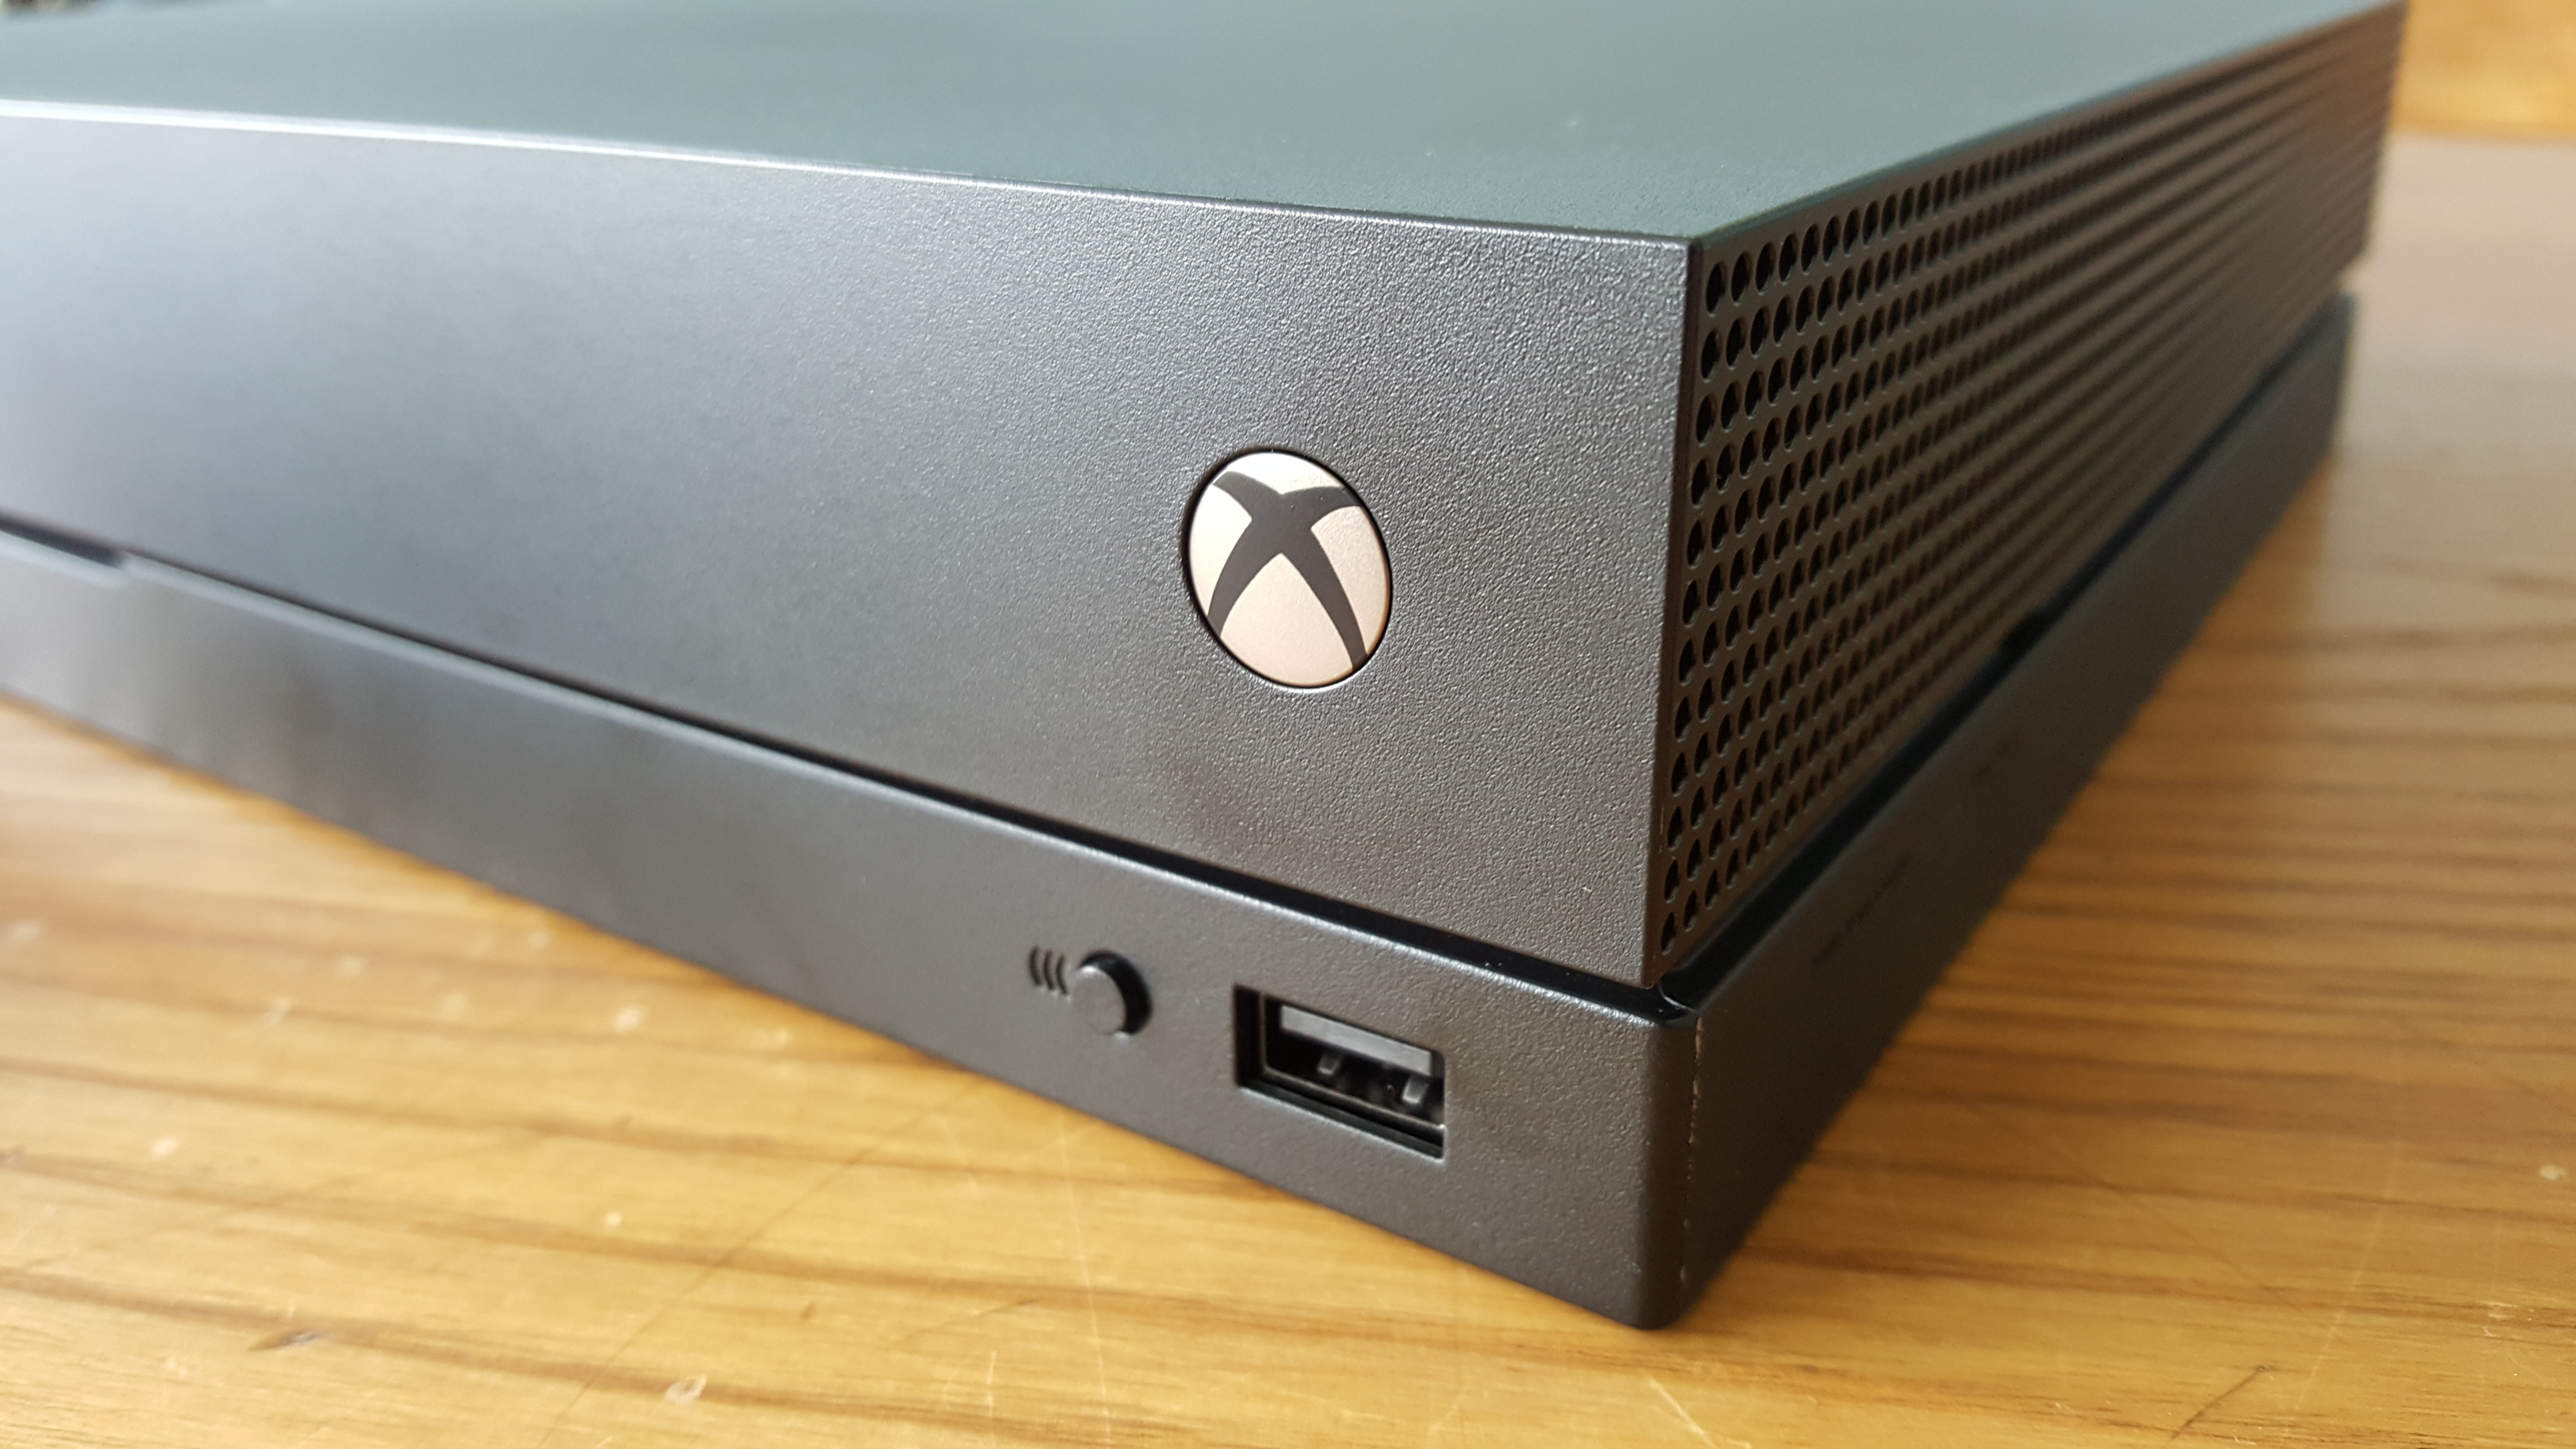 xbox one x in the box